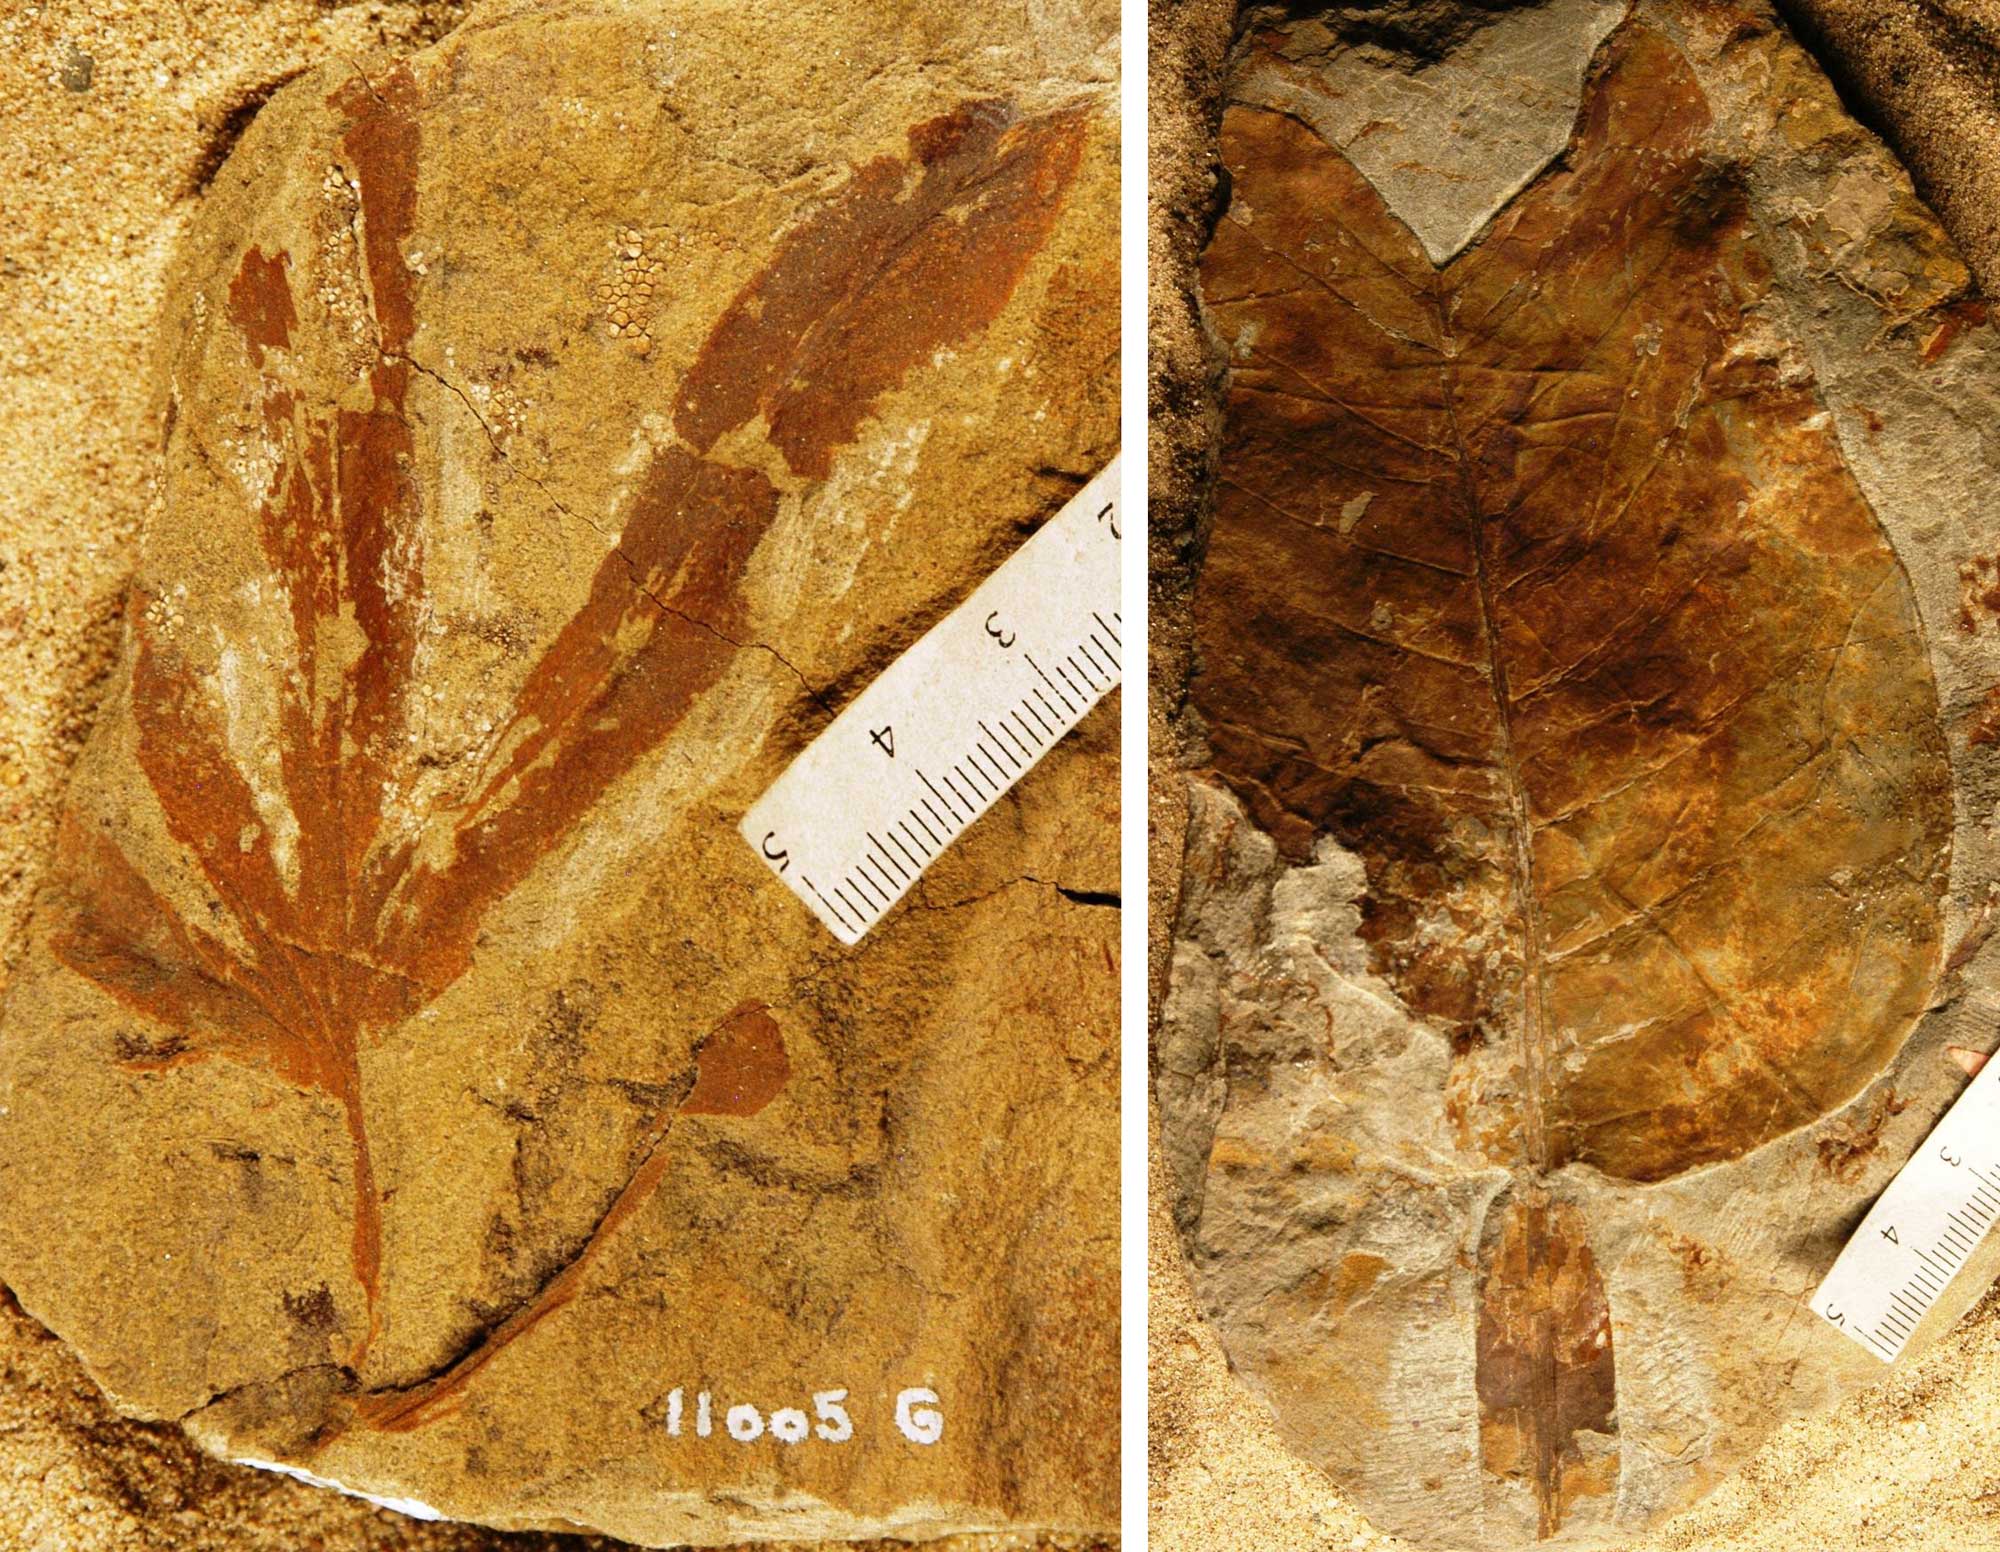 2-panel figure showing photos of leaf fossils from the Late Cretaceous of Colorado. Panel 1: Part of a leaf of a climbing fern; the leaf is palmately dissected into about four lobs. Panel 2: Leaf of a tulip poplar, a type of tree. The leaf has a bilobed tip and a winged stalk.